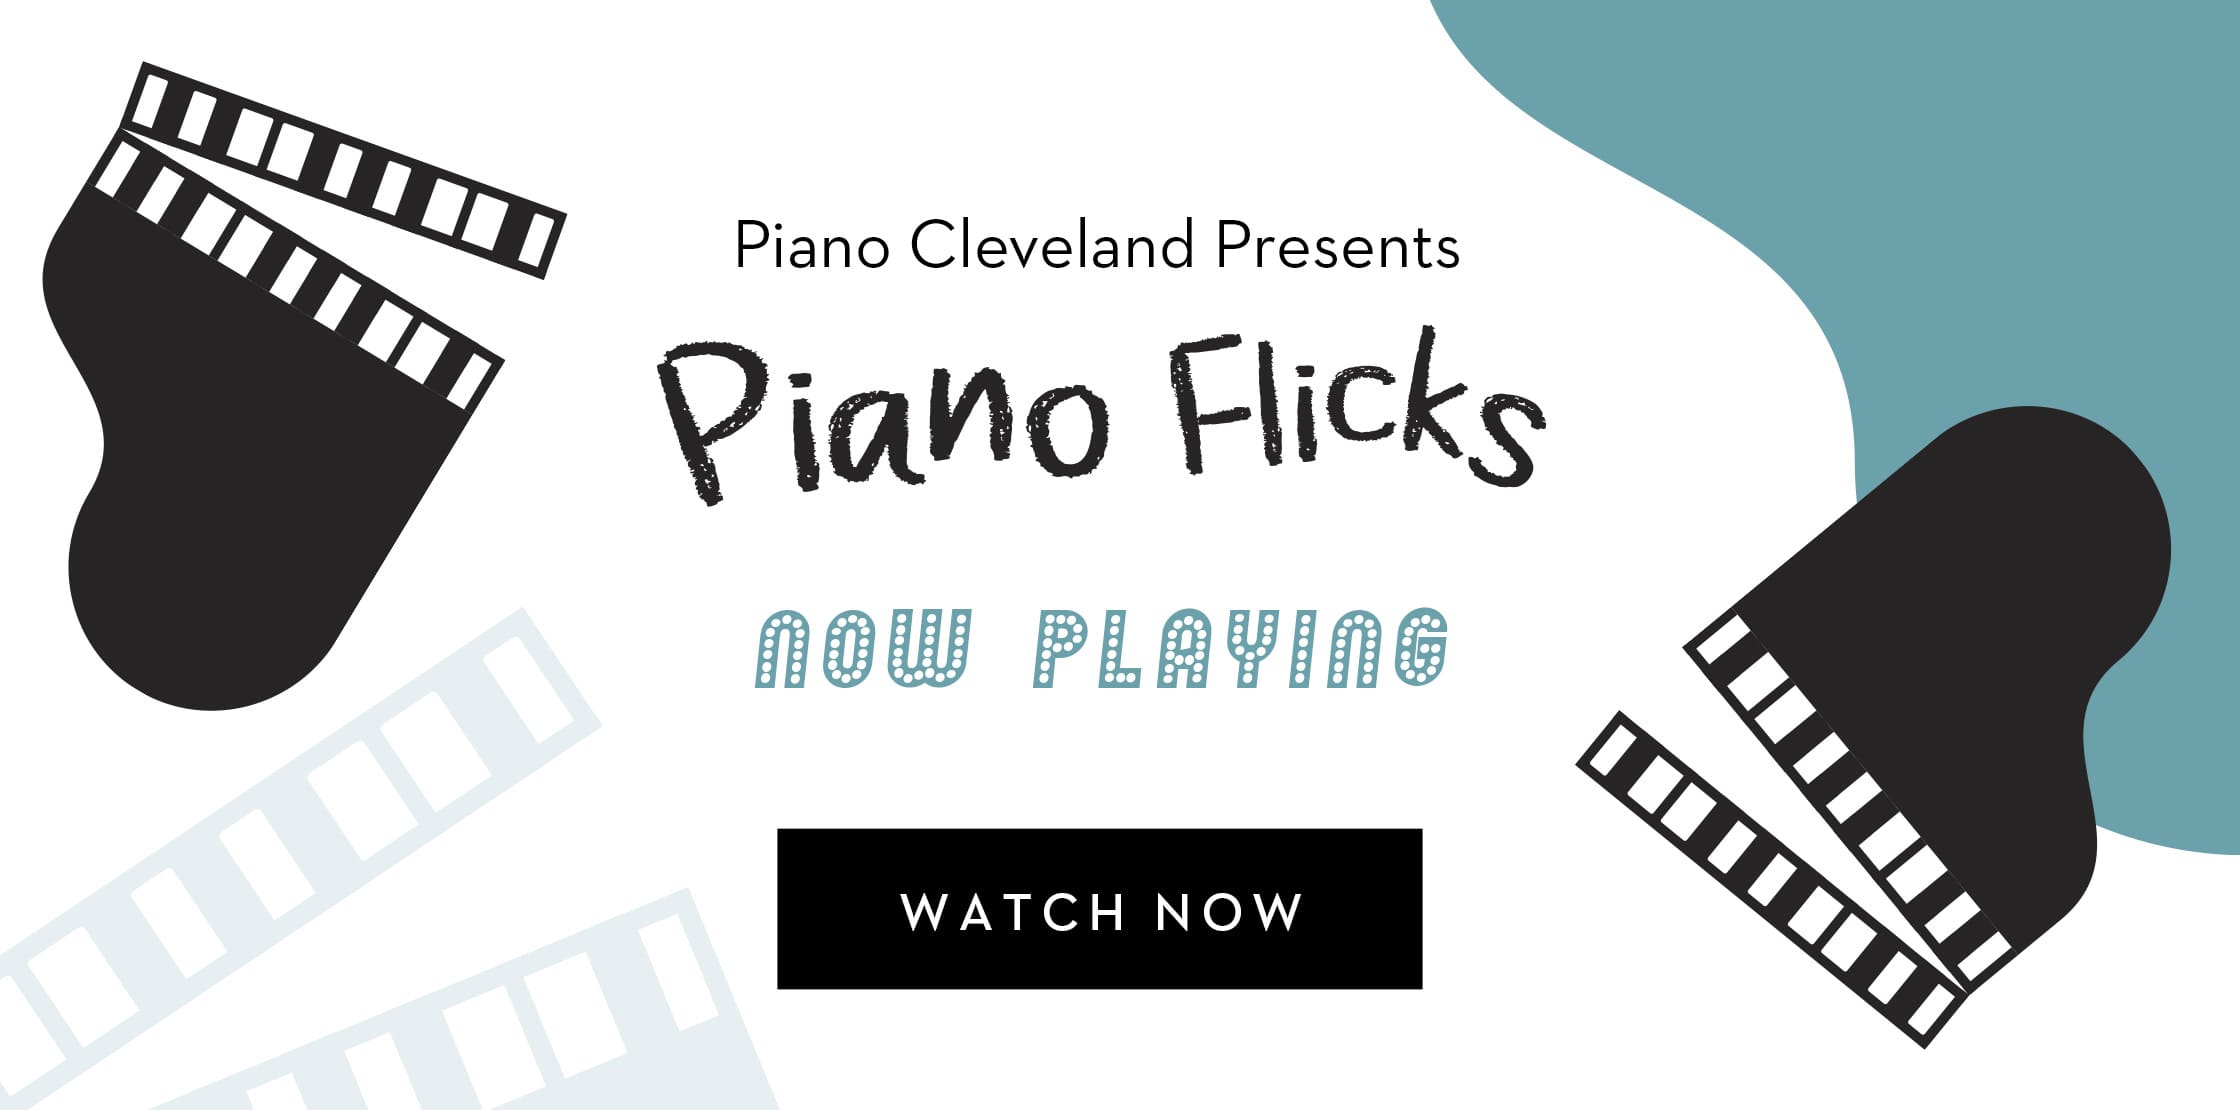 Watch Now PianoFlicks presented by Piano Cleveland